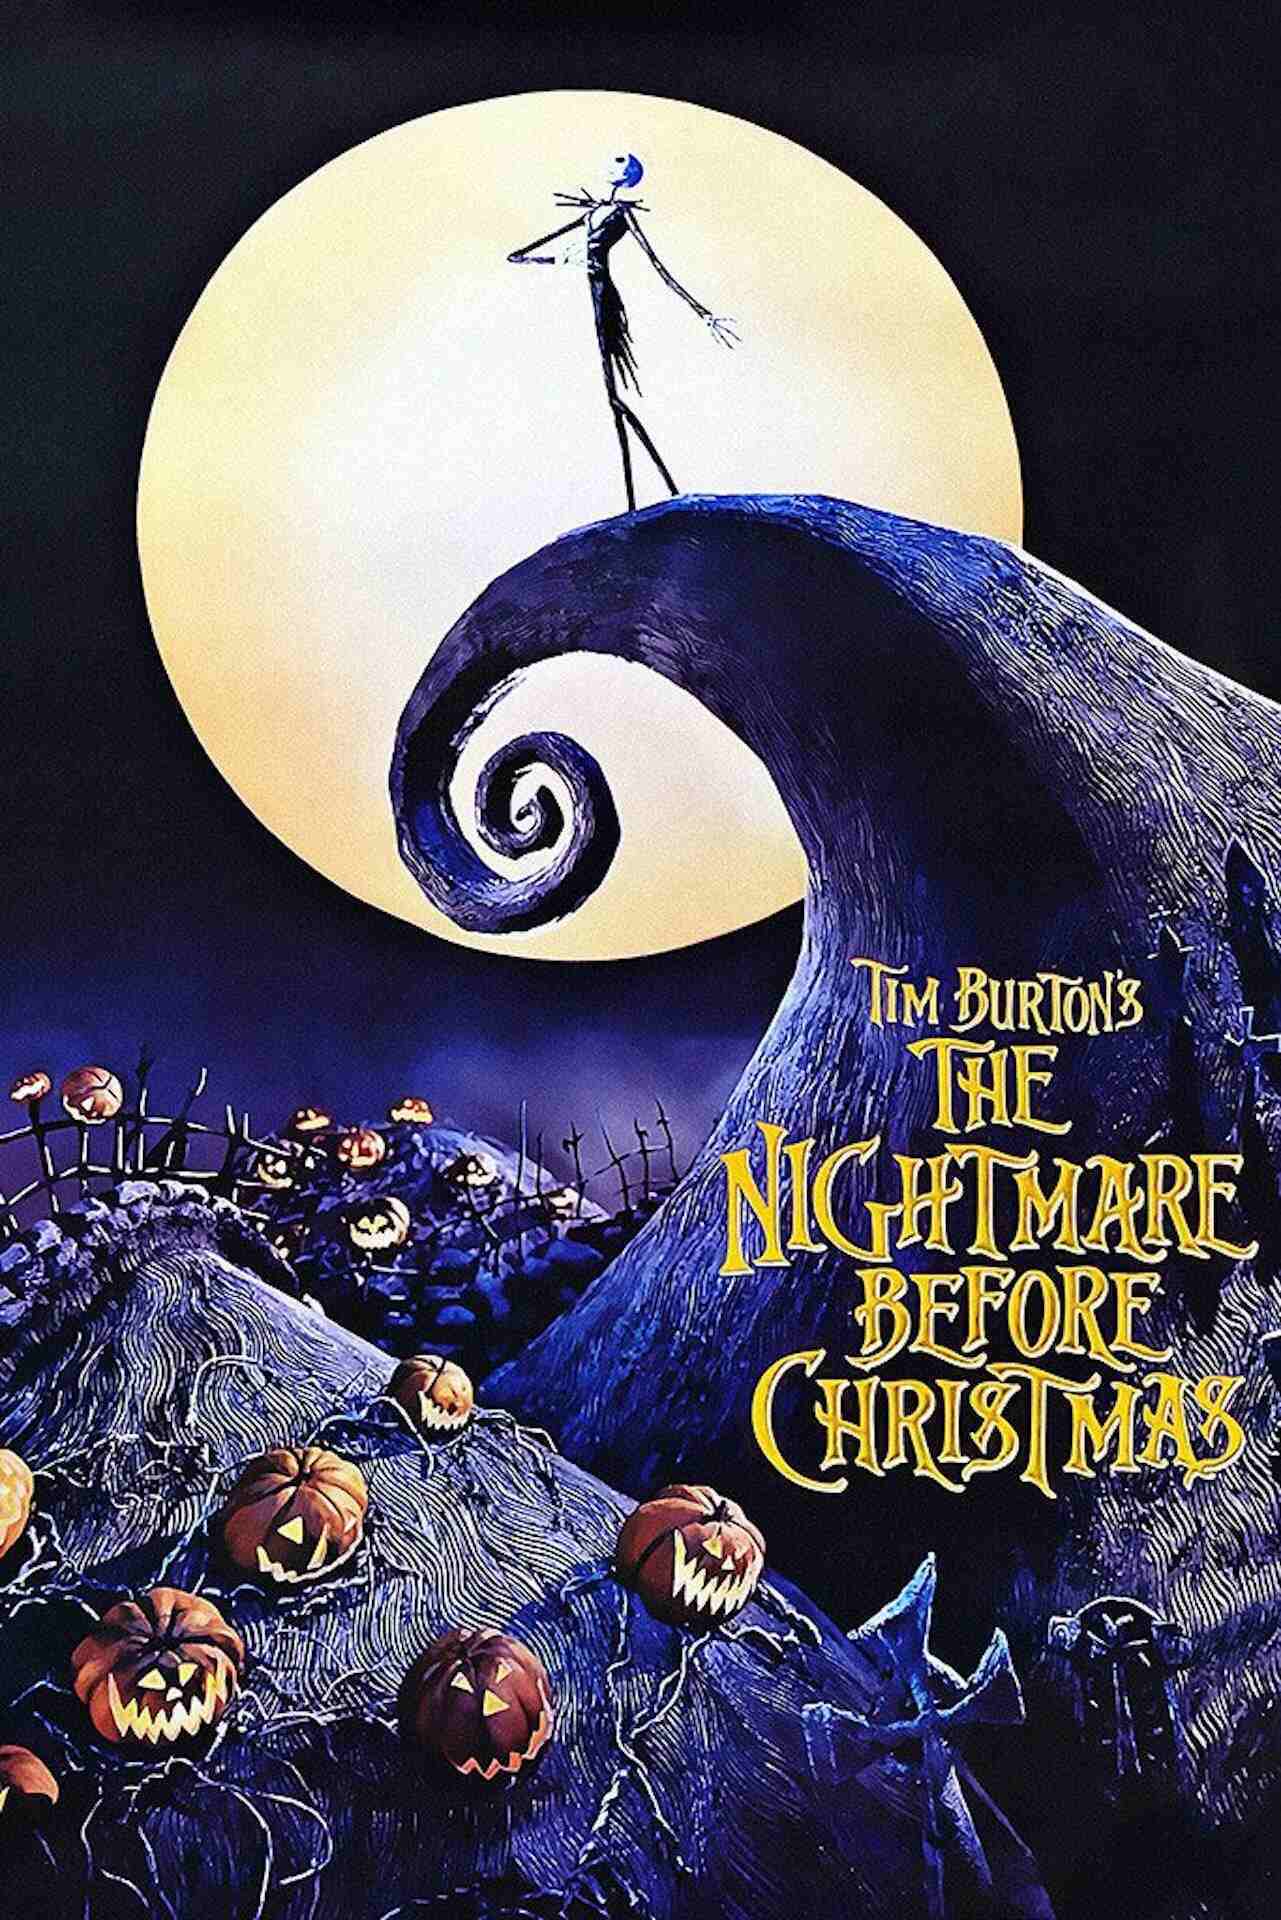 Poster art for The Nightmare Before Christmas